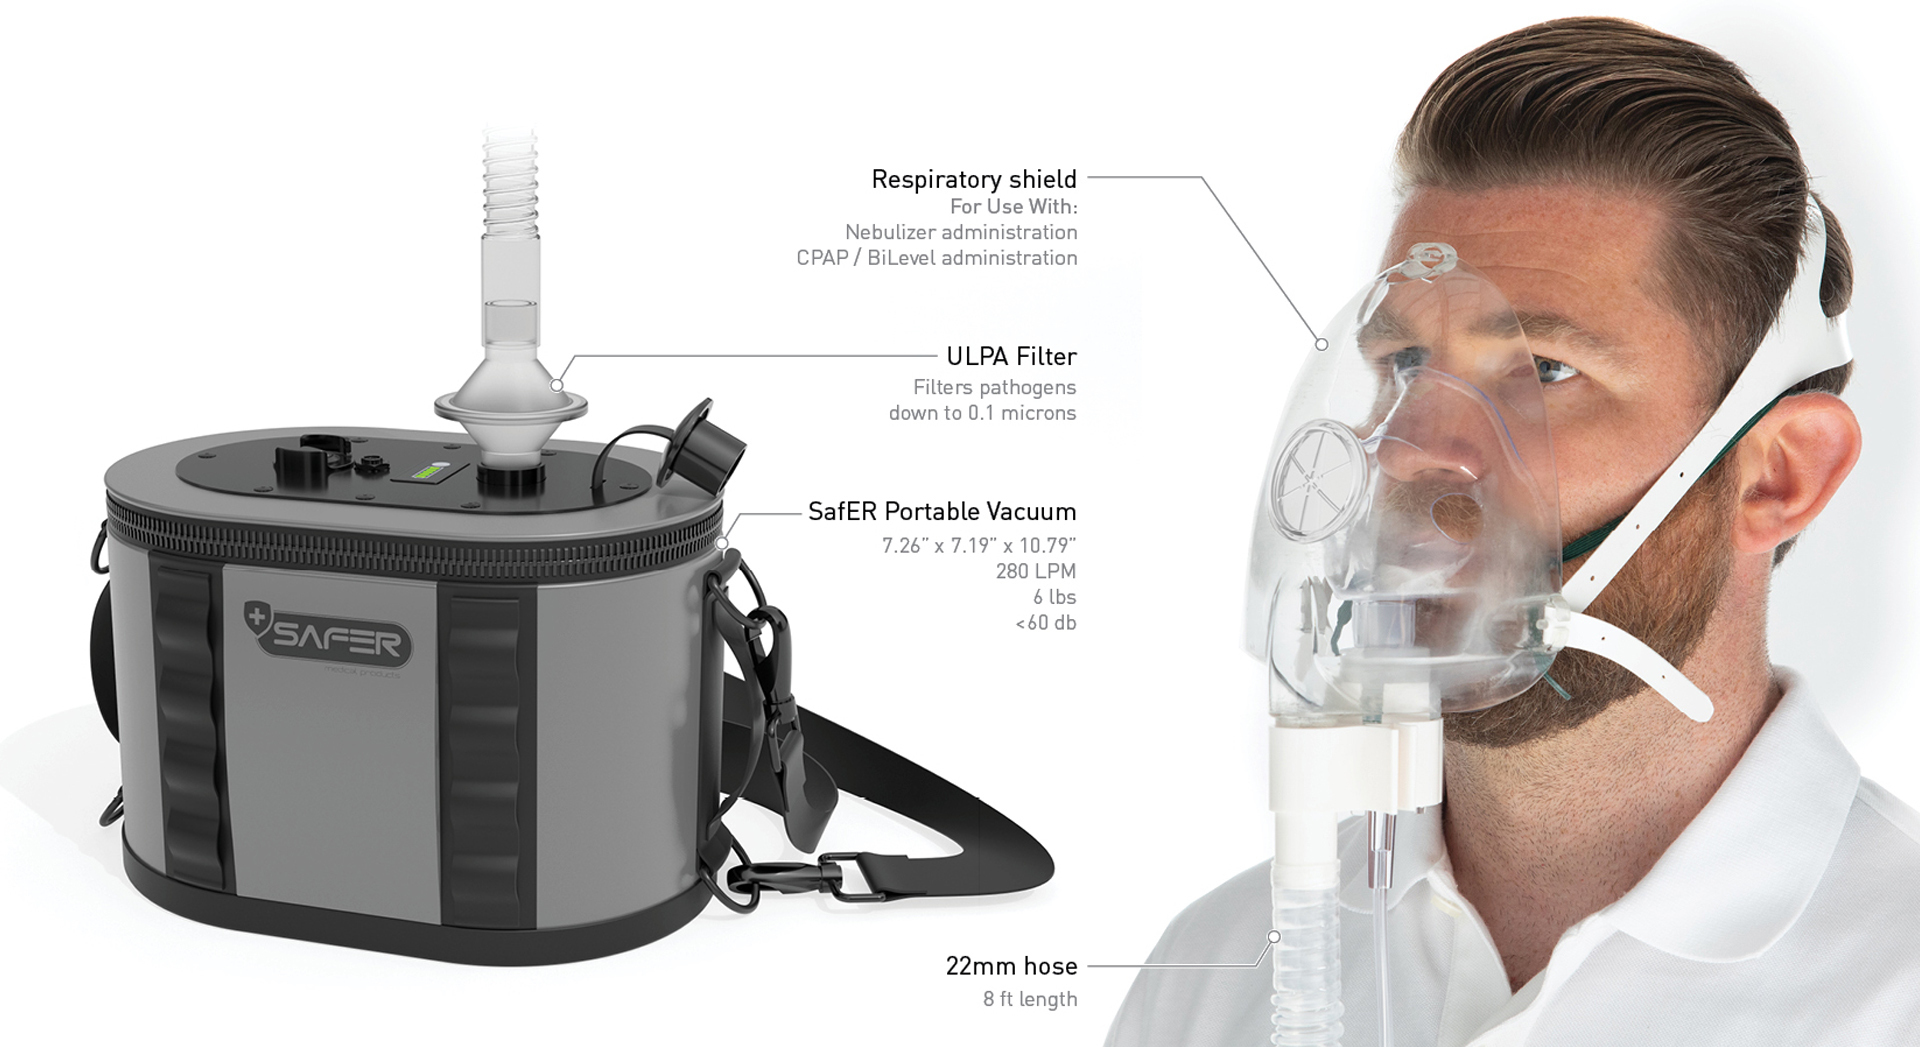 Courtesy. The SafER system, a face shield that uses a vacuum to direct the flow of air, provides defense against exposure and spread of airborne contaminants.